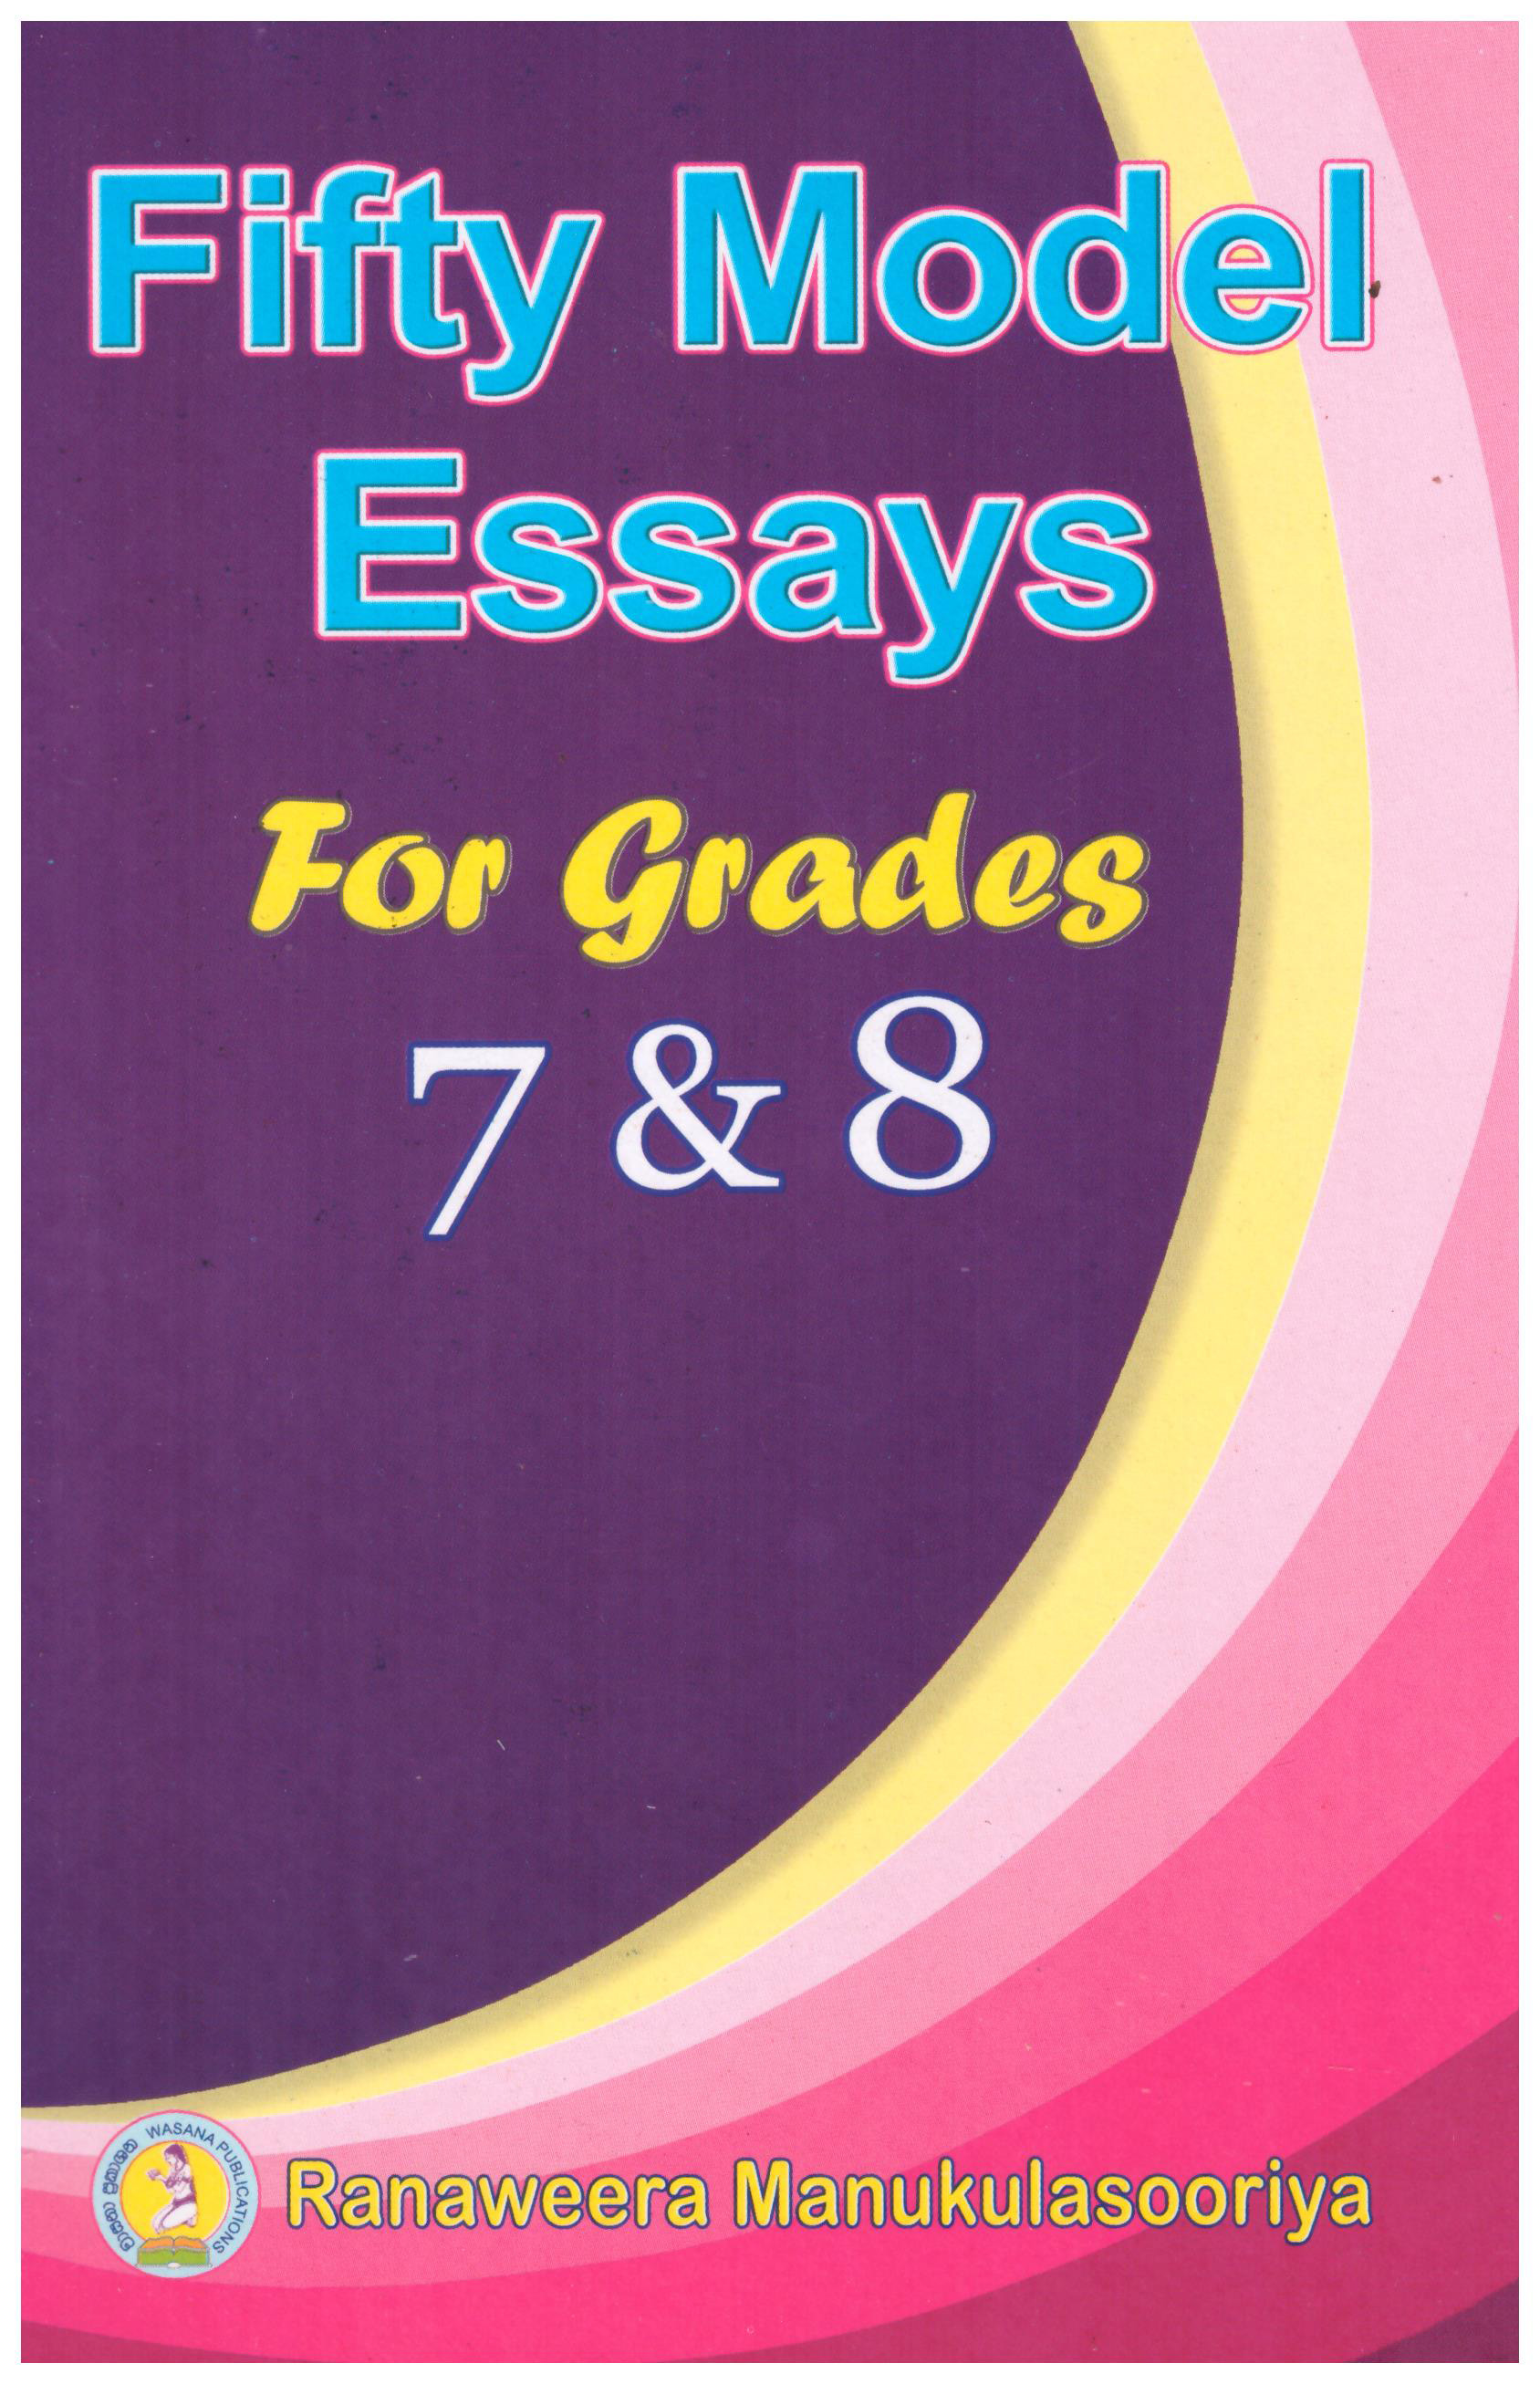 Fifty Model Essays For Grades 7&8